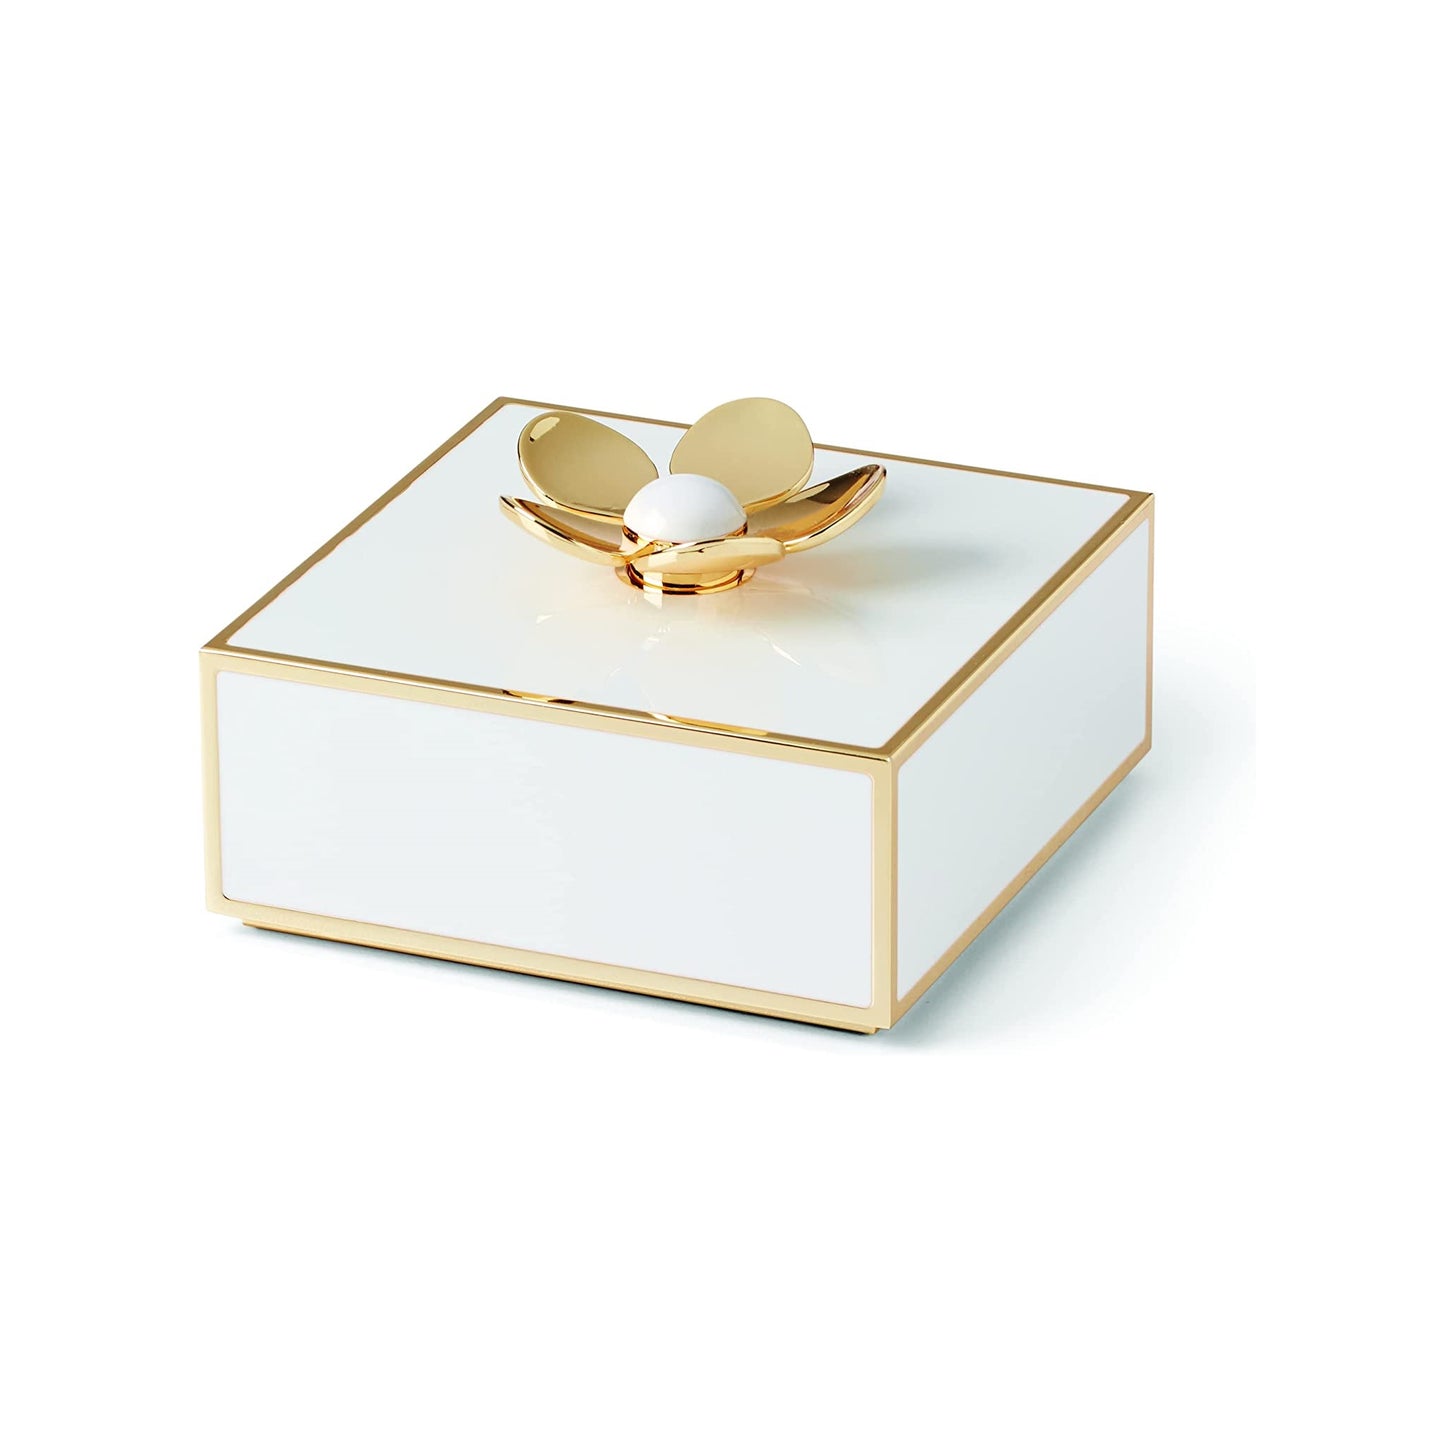 Kate Spade New York Make It Pop White/Gold Floral Covered Box